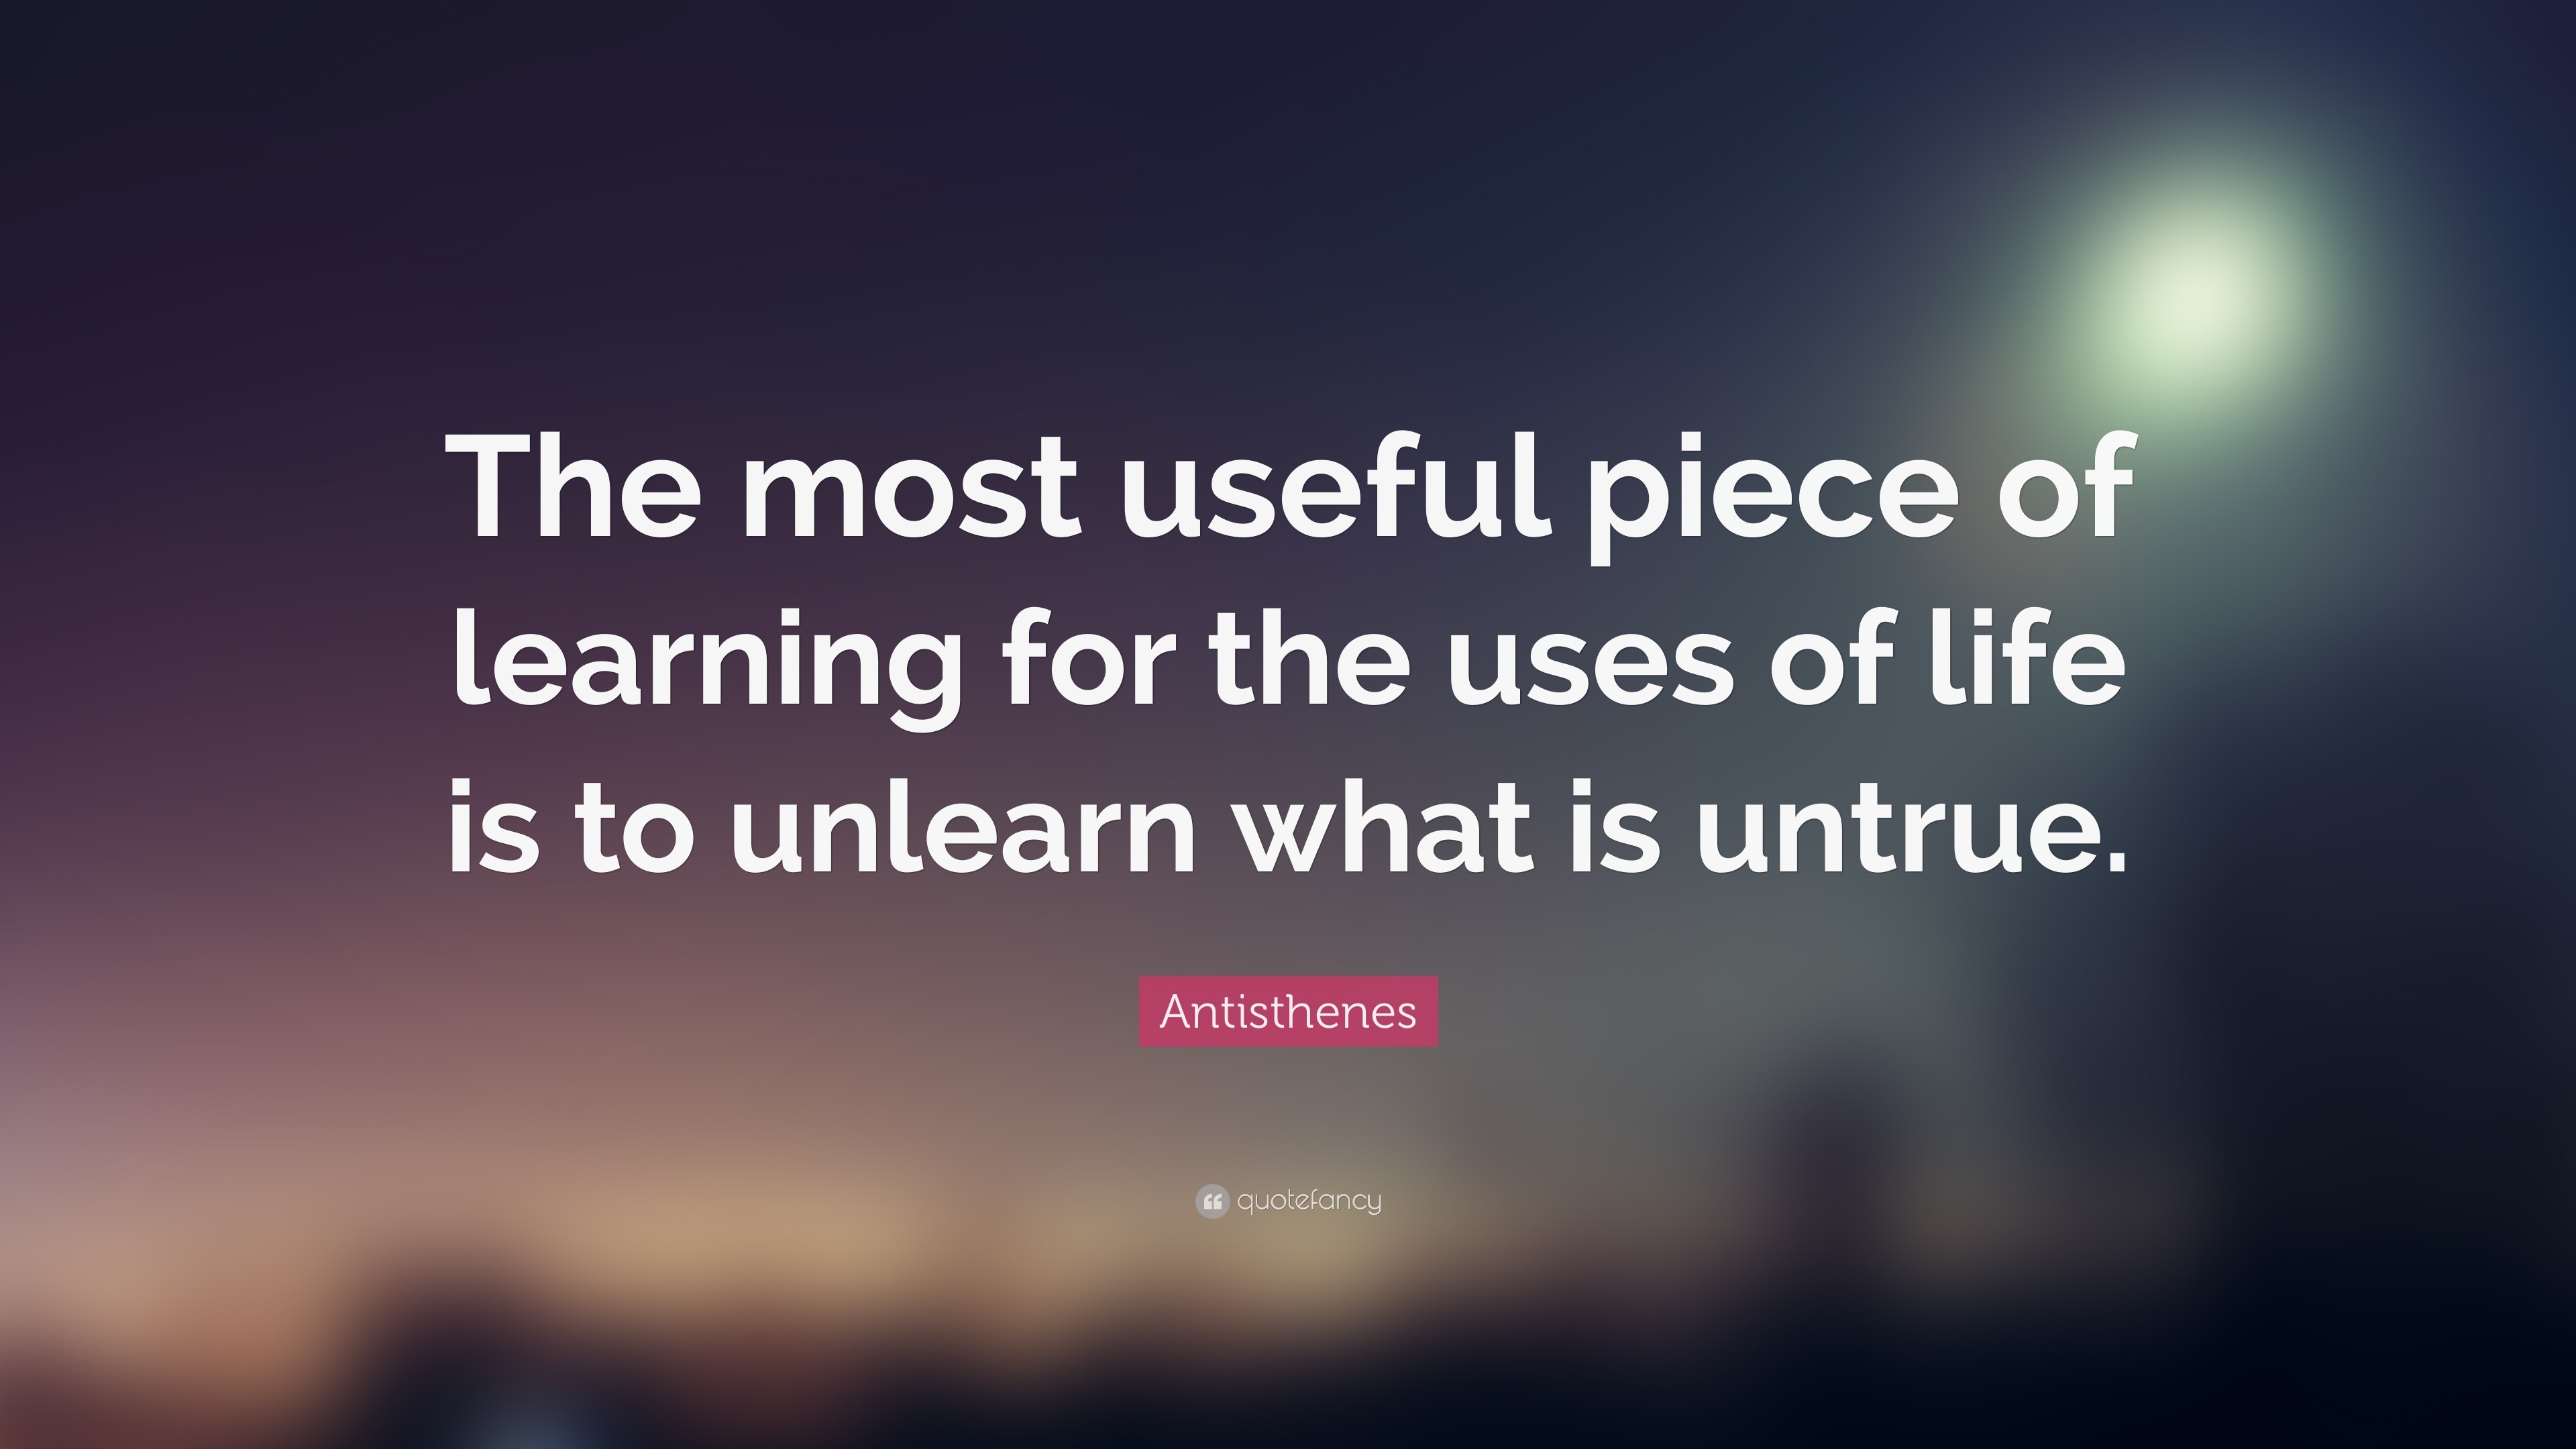 Antisthenes Quote: “The most useful piece of learning for the uses of